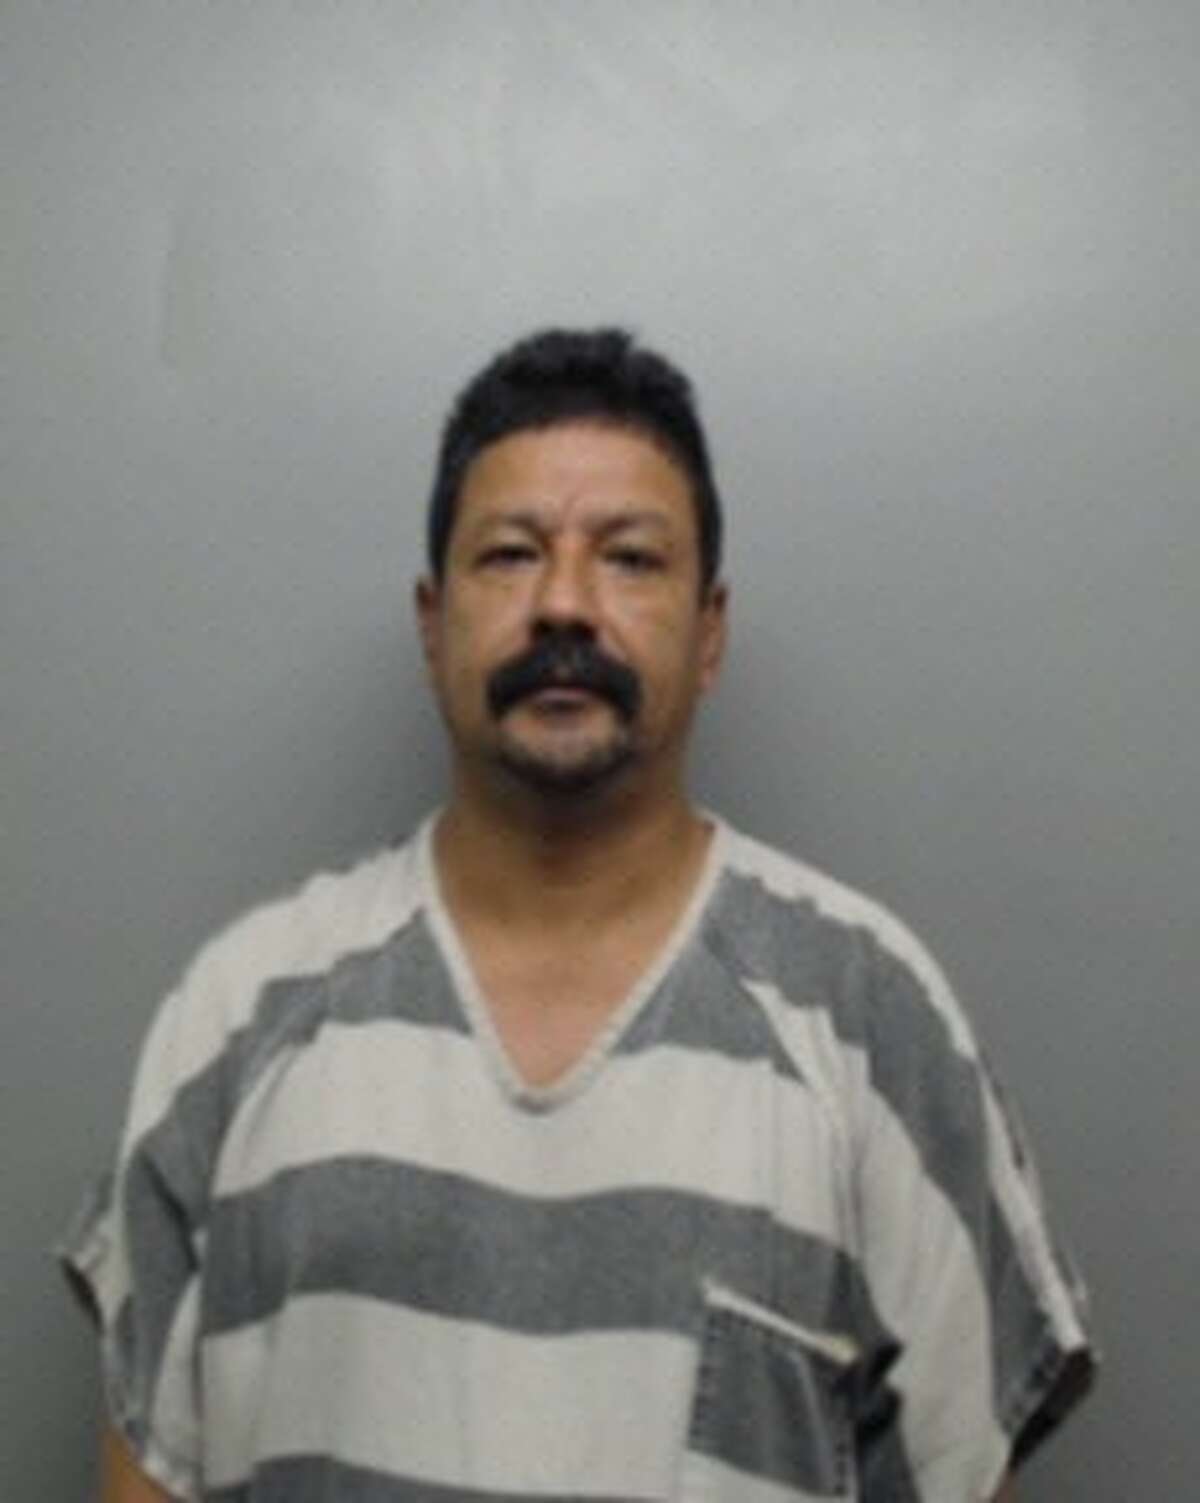 Salvador Hernandez, 46, was charged with felony criminal mischief.